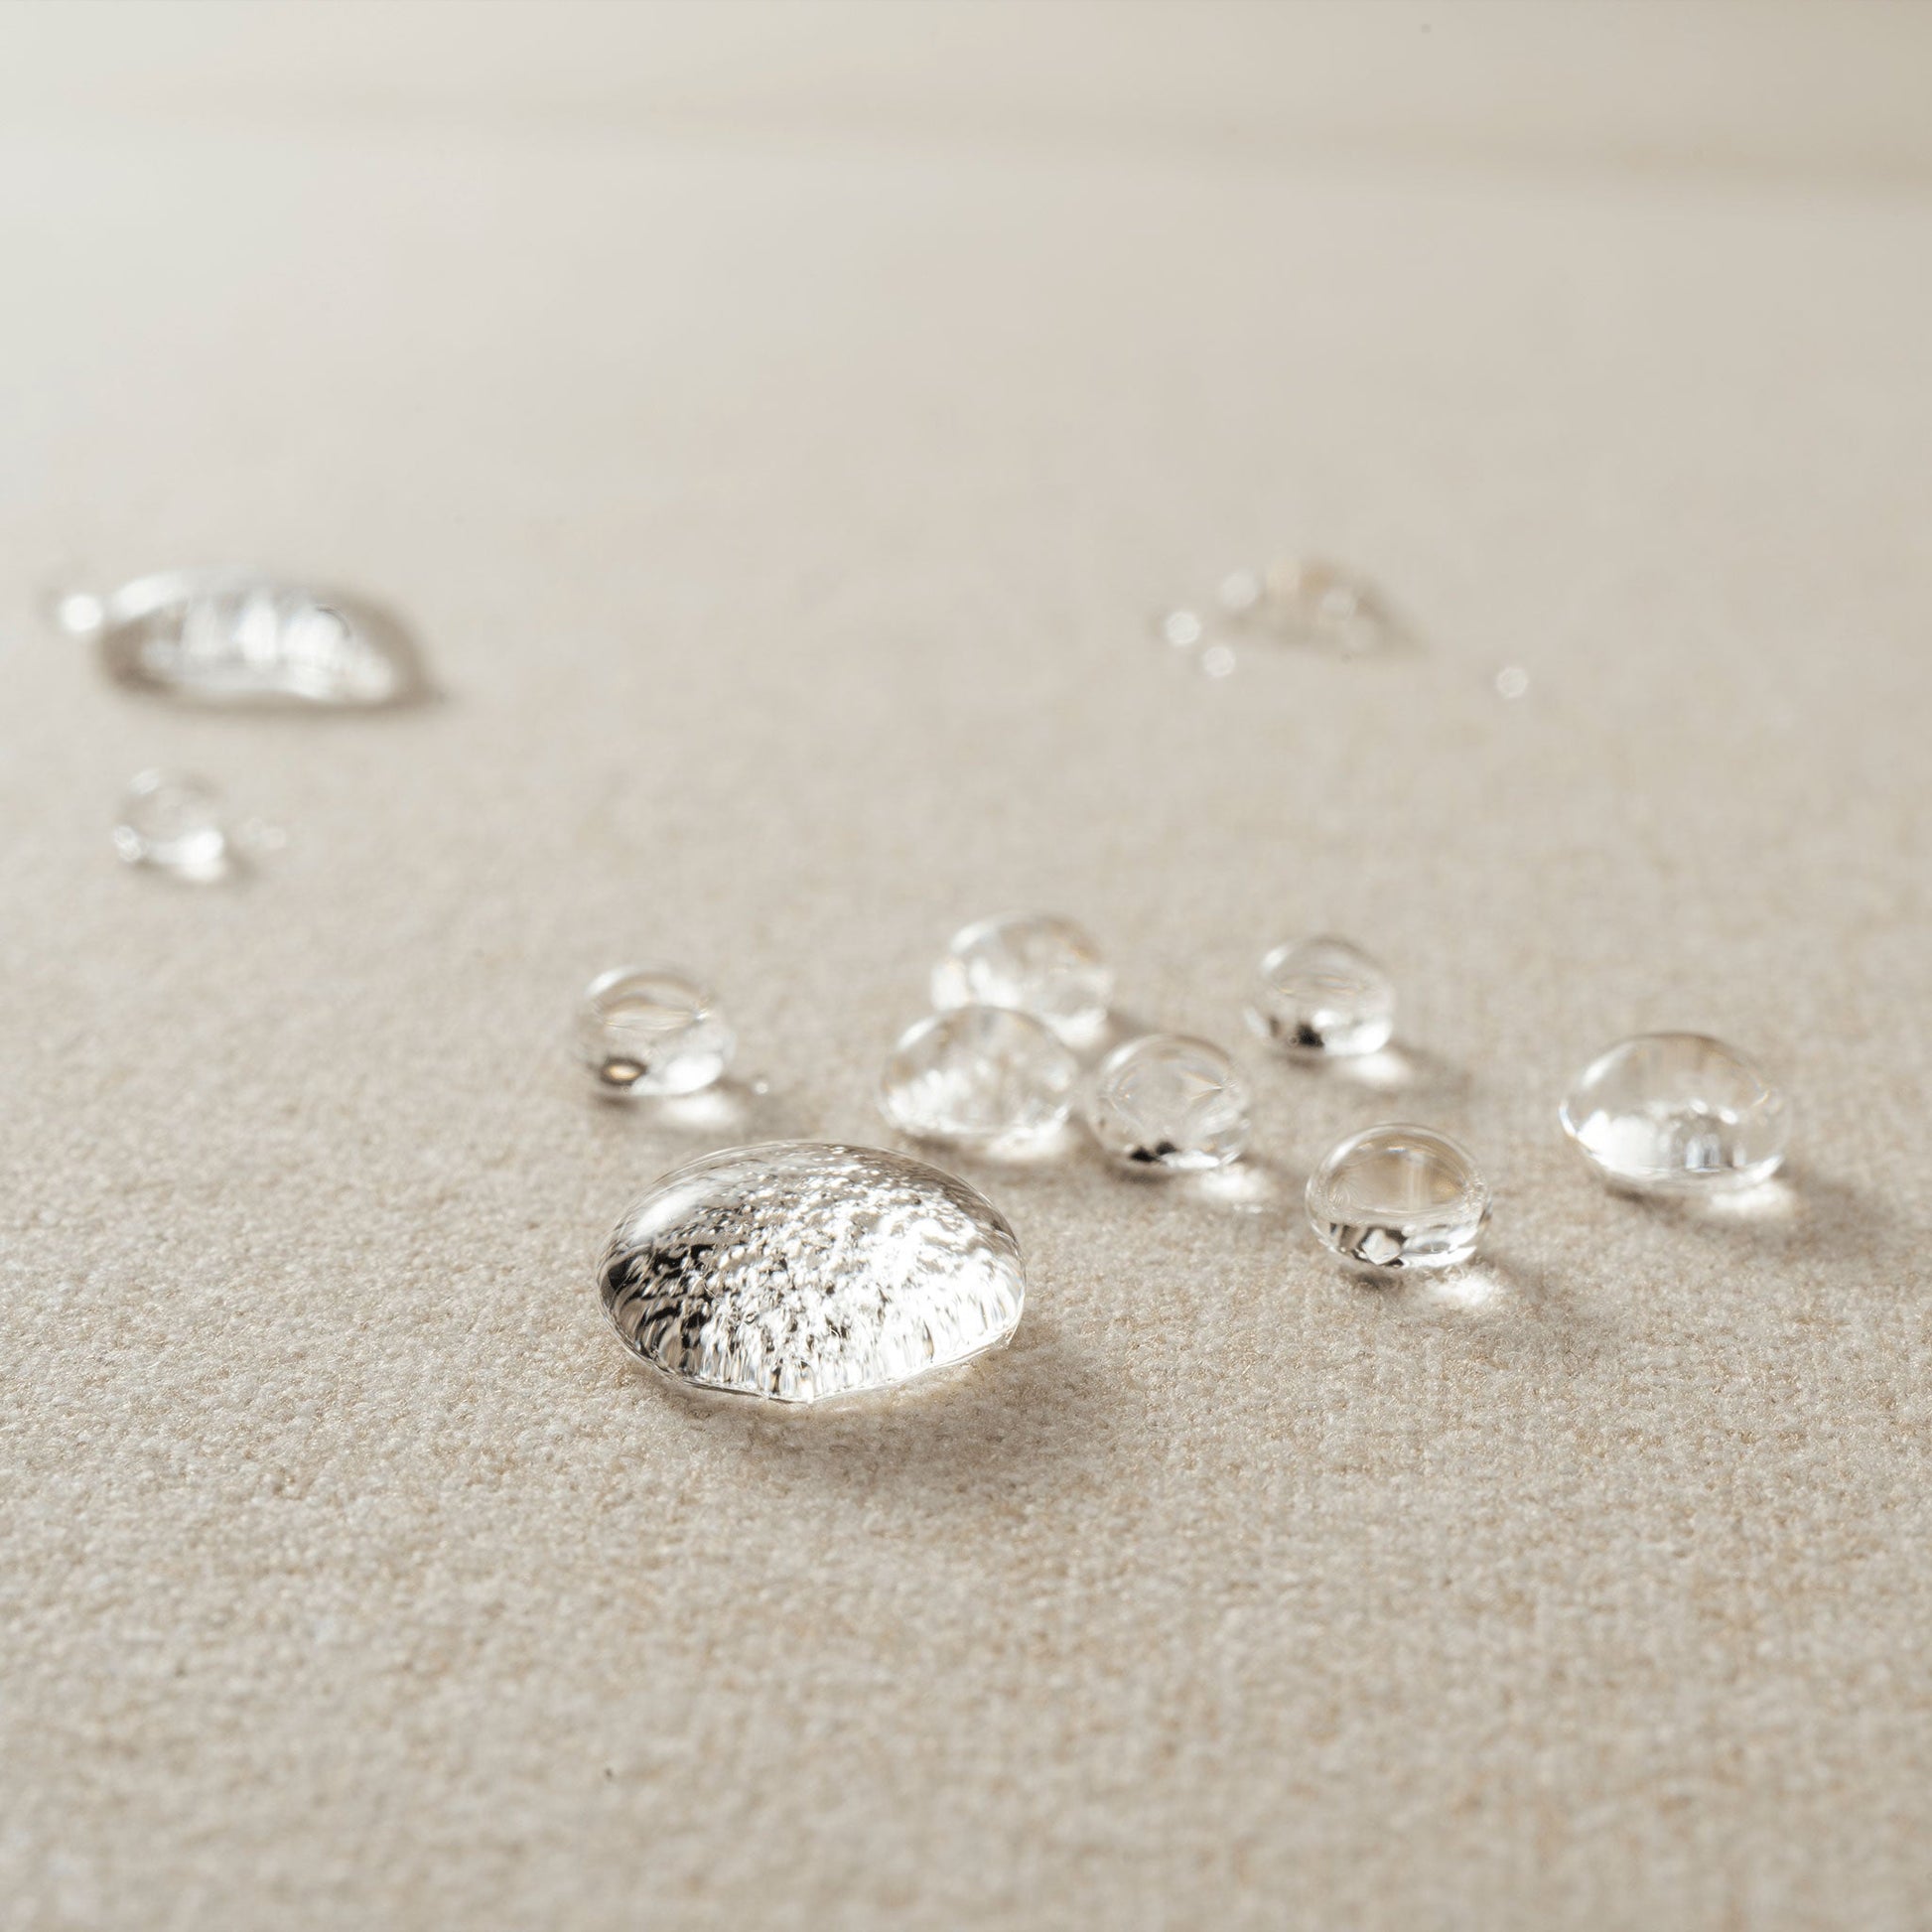  A close-up of water droplets on Rezy Sofa's sophisticated stain-resistant fabric